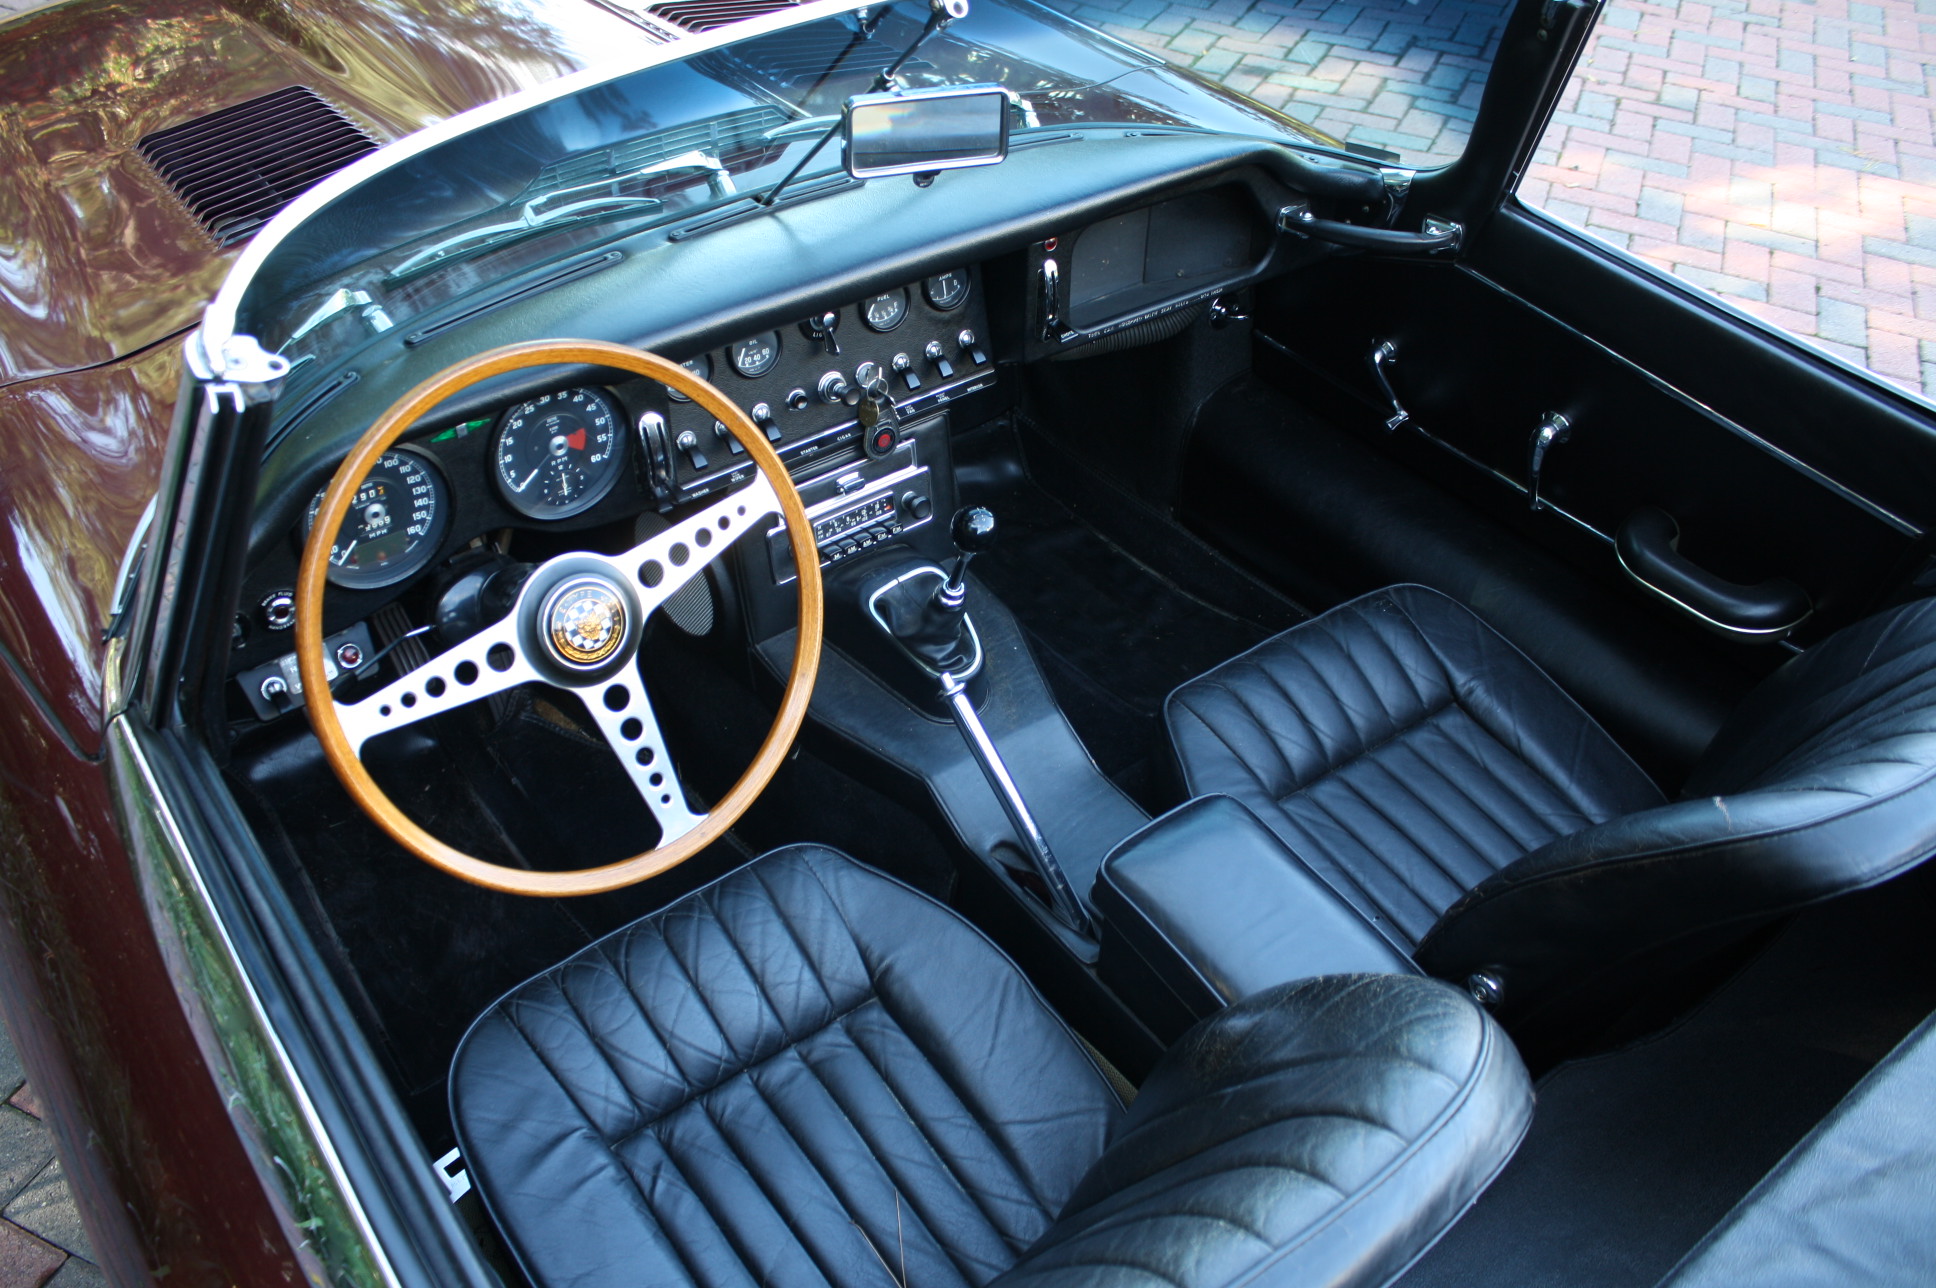 that is the original interior. Yes, it's as nice as it looks!